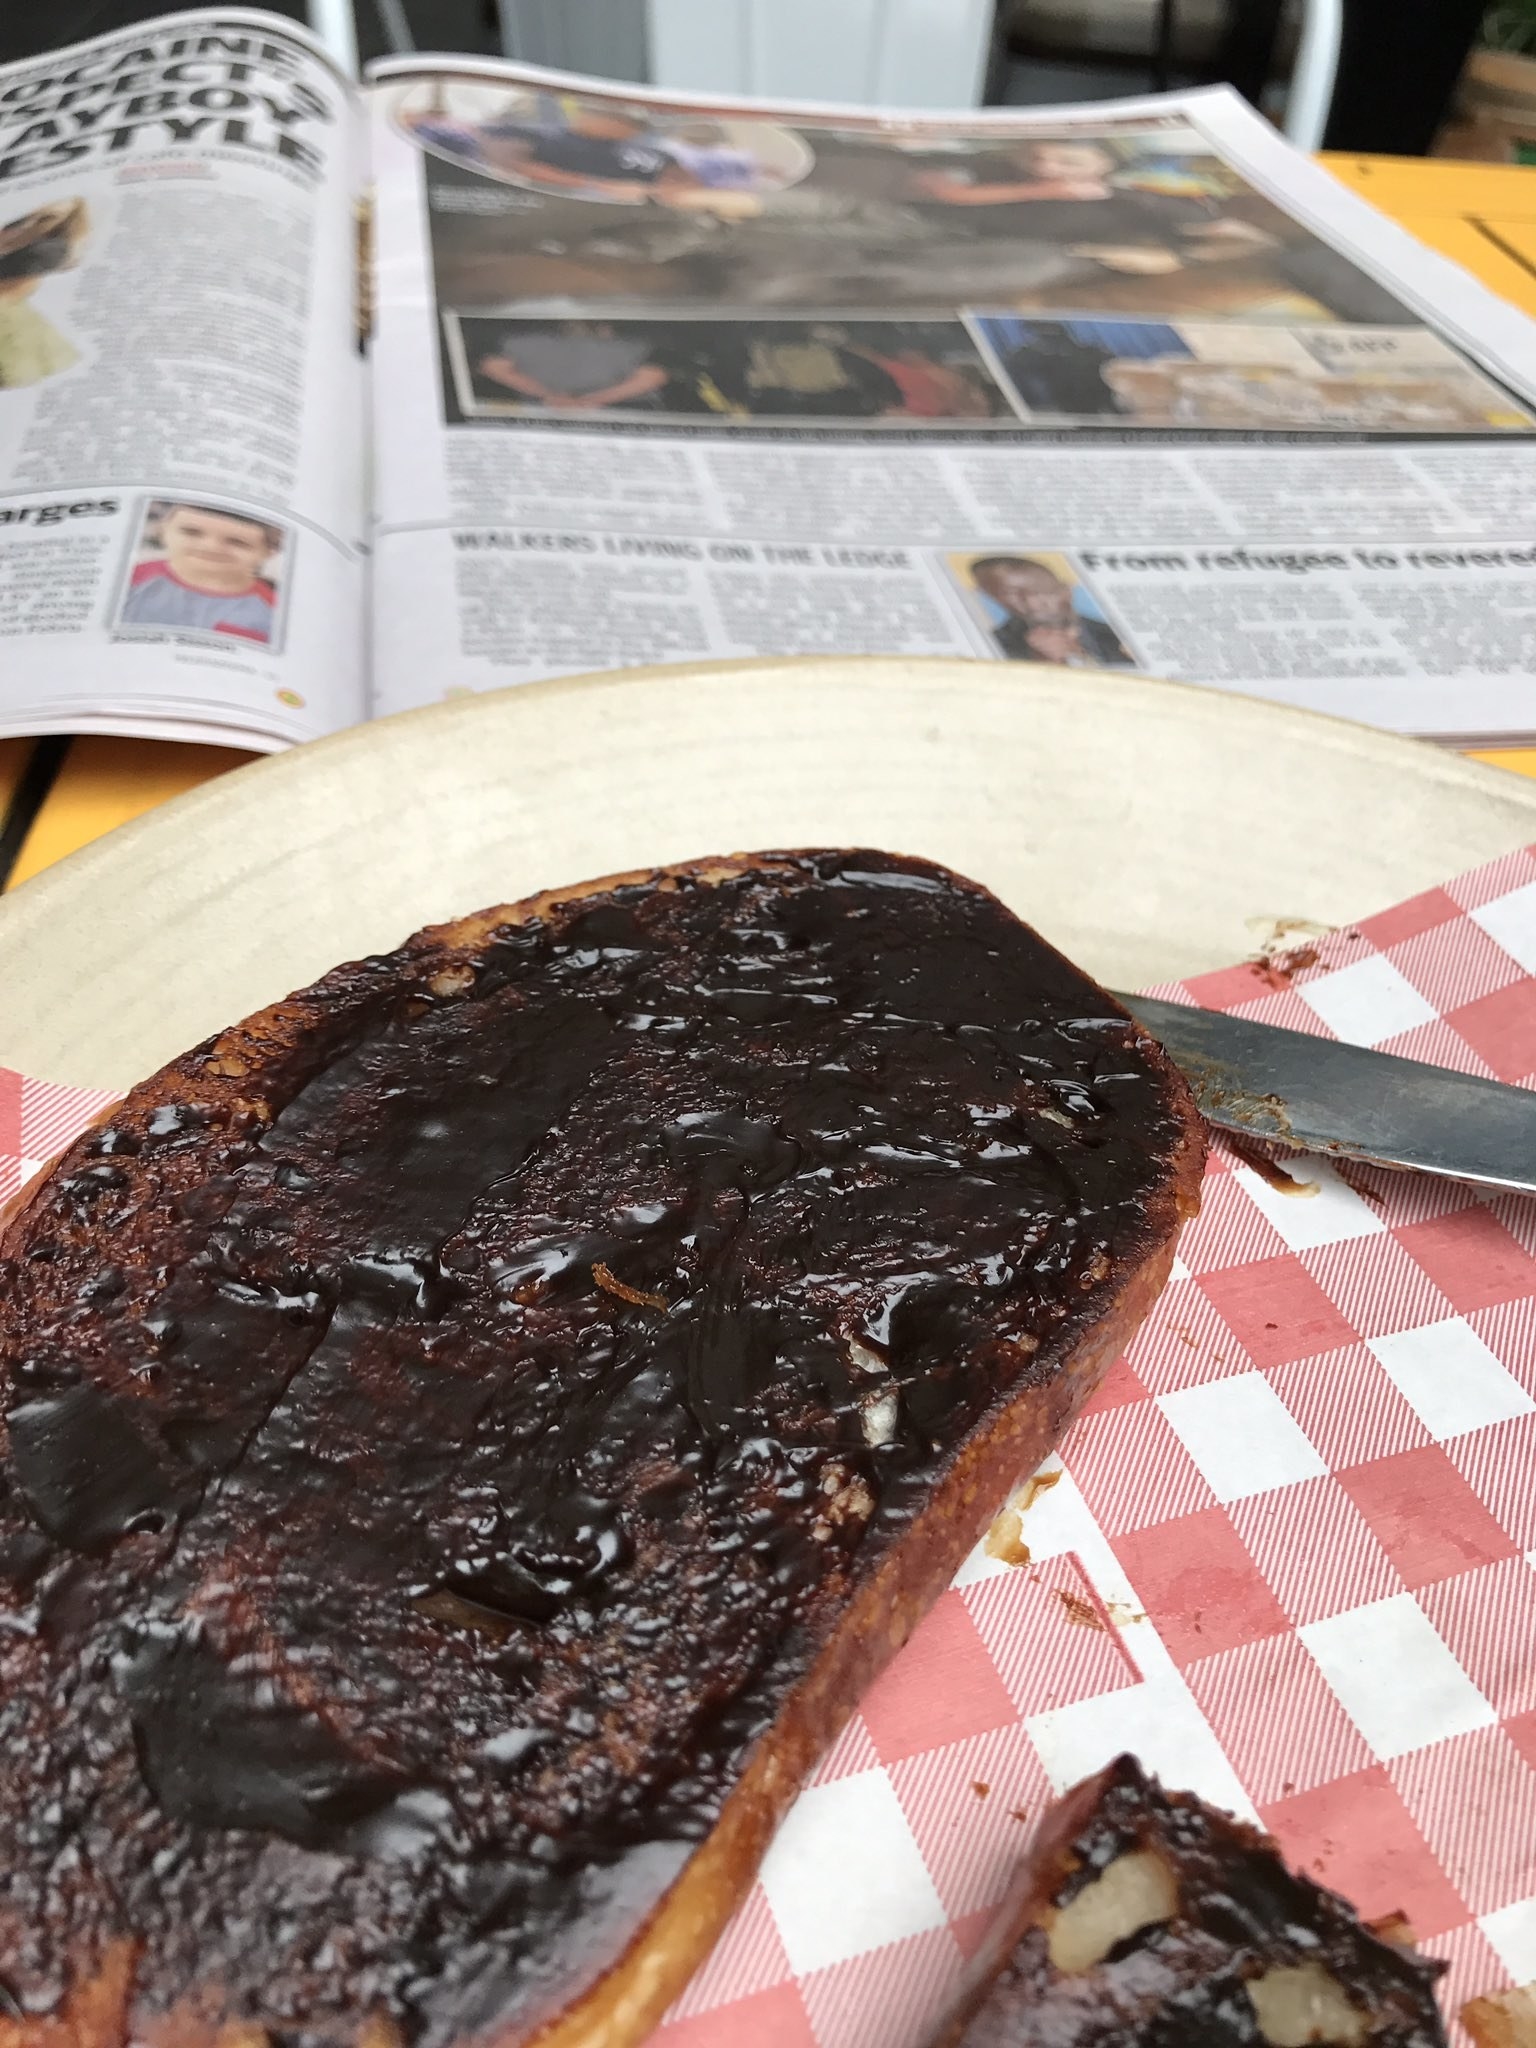 A plate of Vegemite toast which is VERY thickly spread